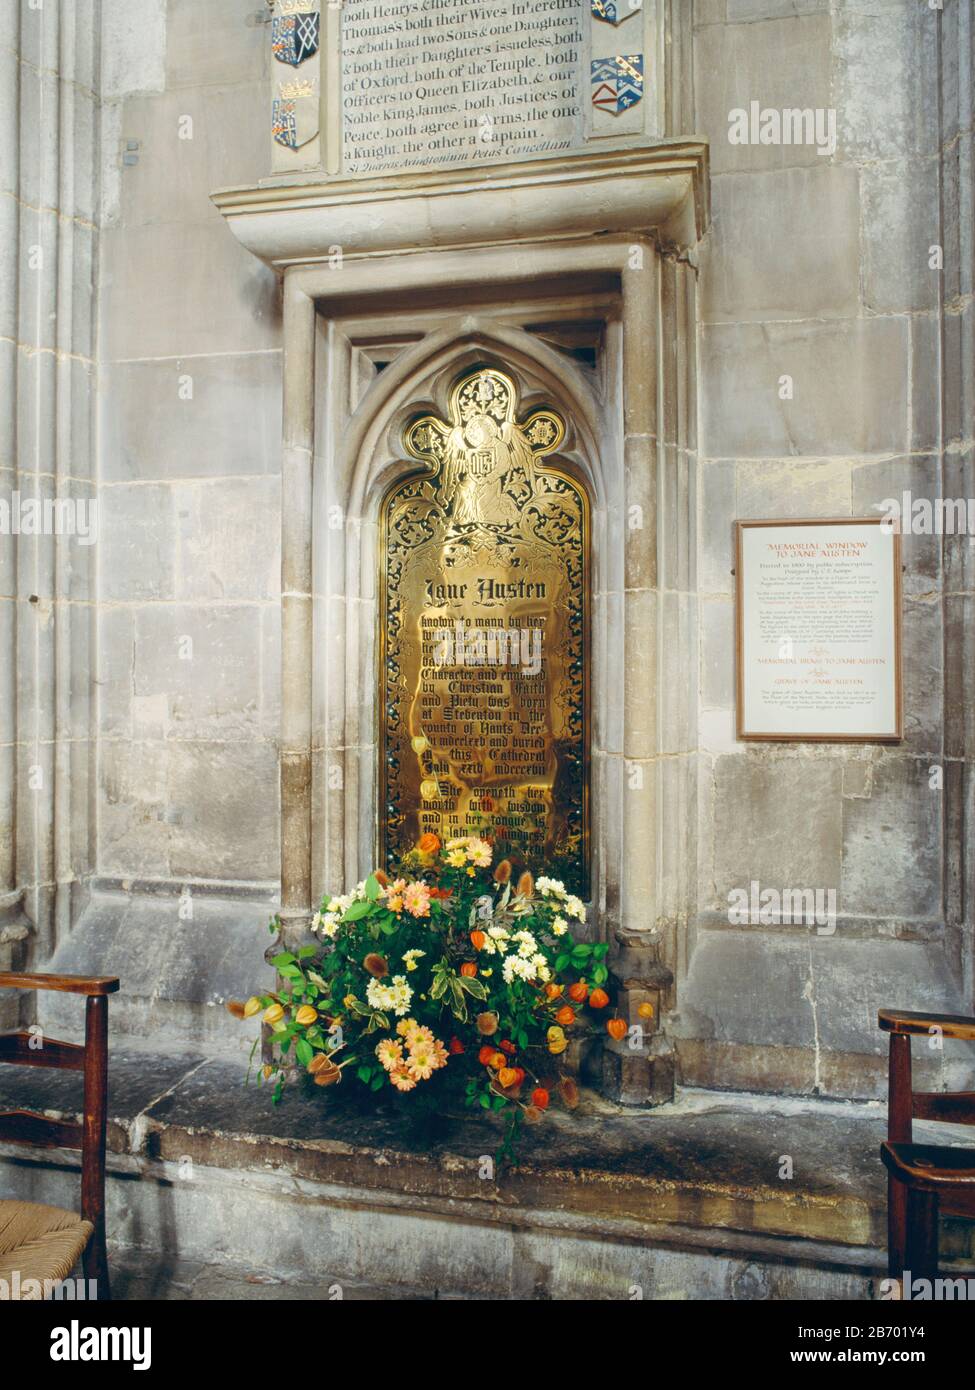 Jane Austen Memorial, Winchester Cathedral, Hampshire, England, UK. Brass memorial plaque to Jane Austen, erected In 1870 by her nephew Edward, in the Stock Photo